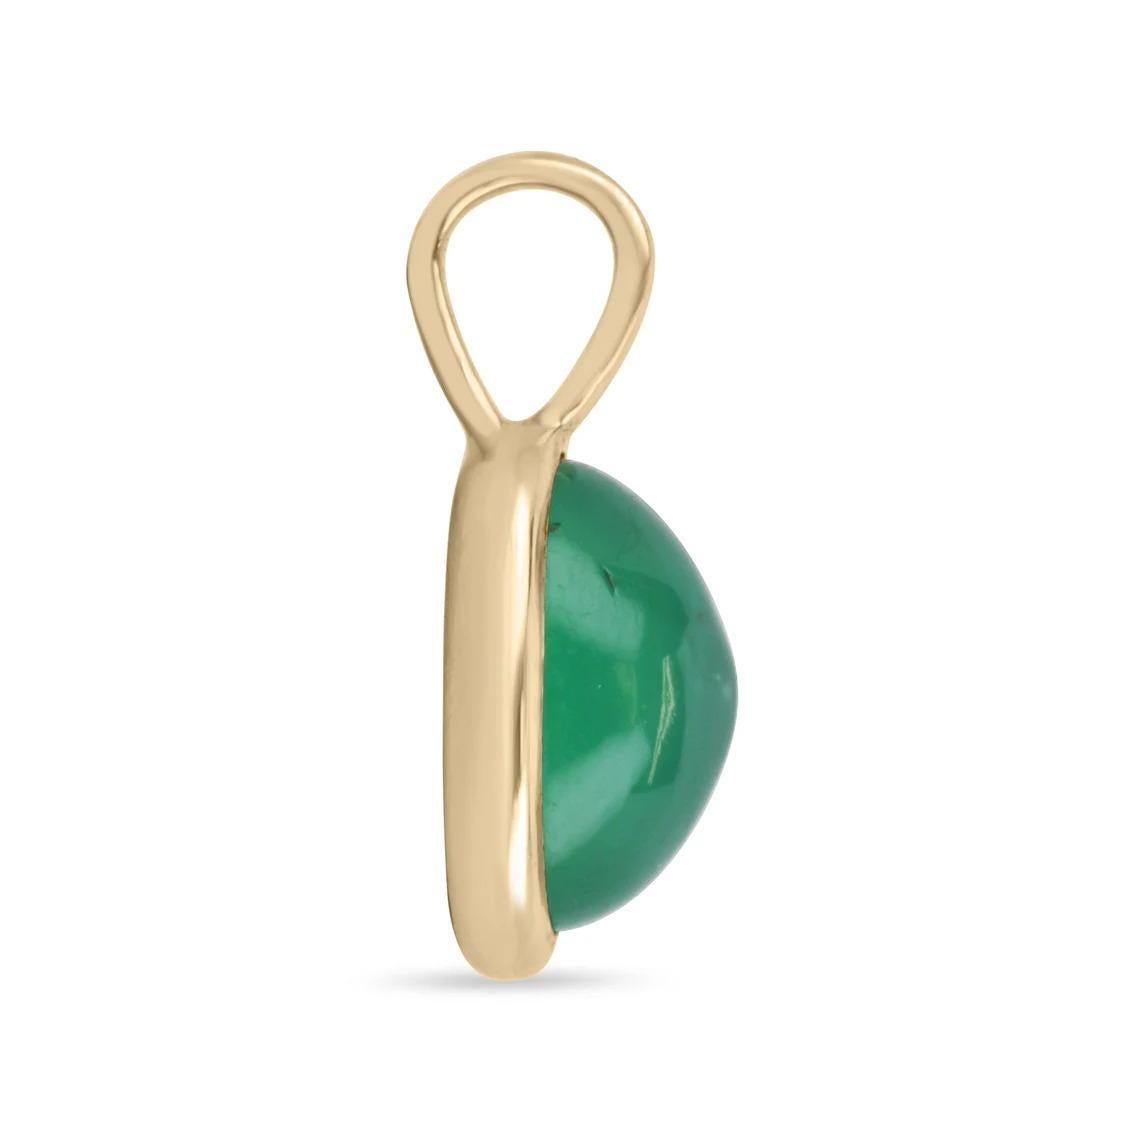 Featured here is a stunning, cabochon natural oval emerald pendant in fine 14K gold. Displayed is a medium-green emerald bezel-set. The earth mined, green cabochon emerald has a charming green color with good clarity. This is an excellent gift for a